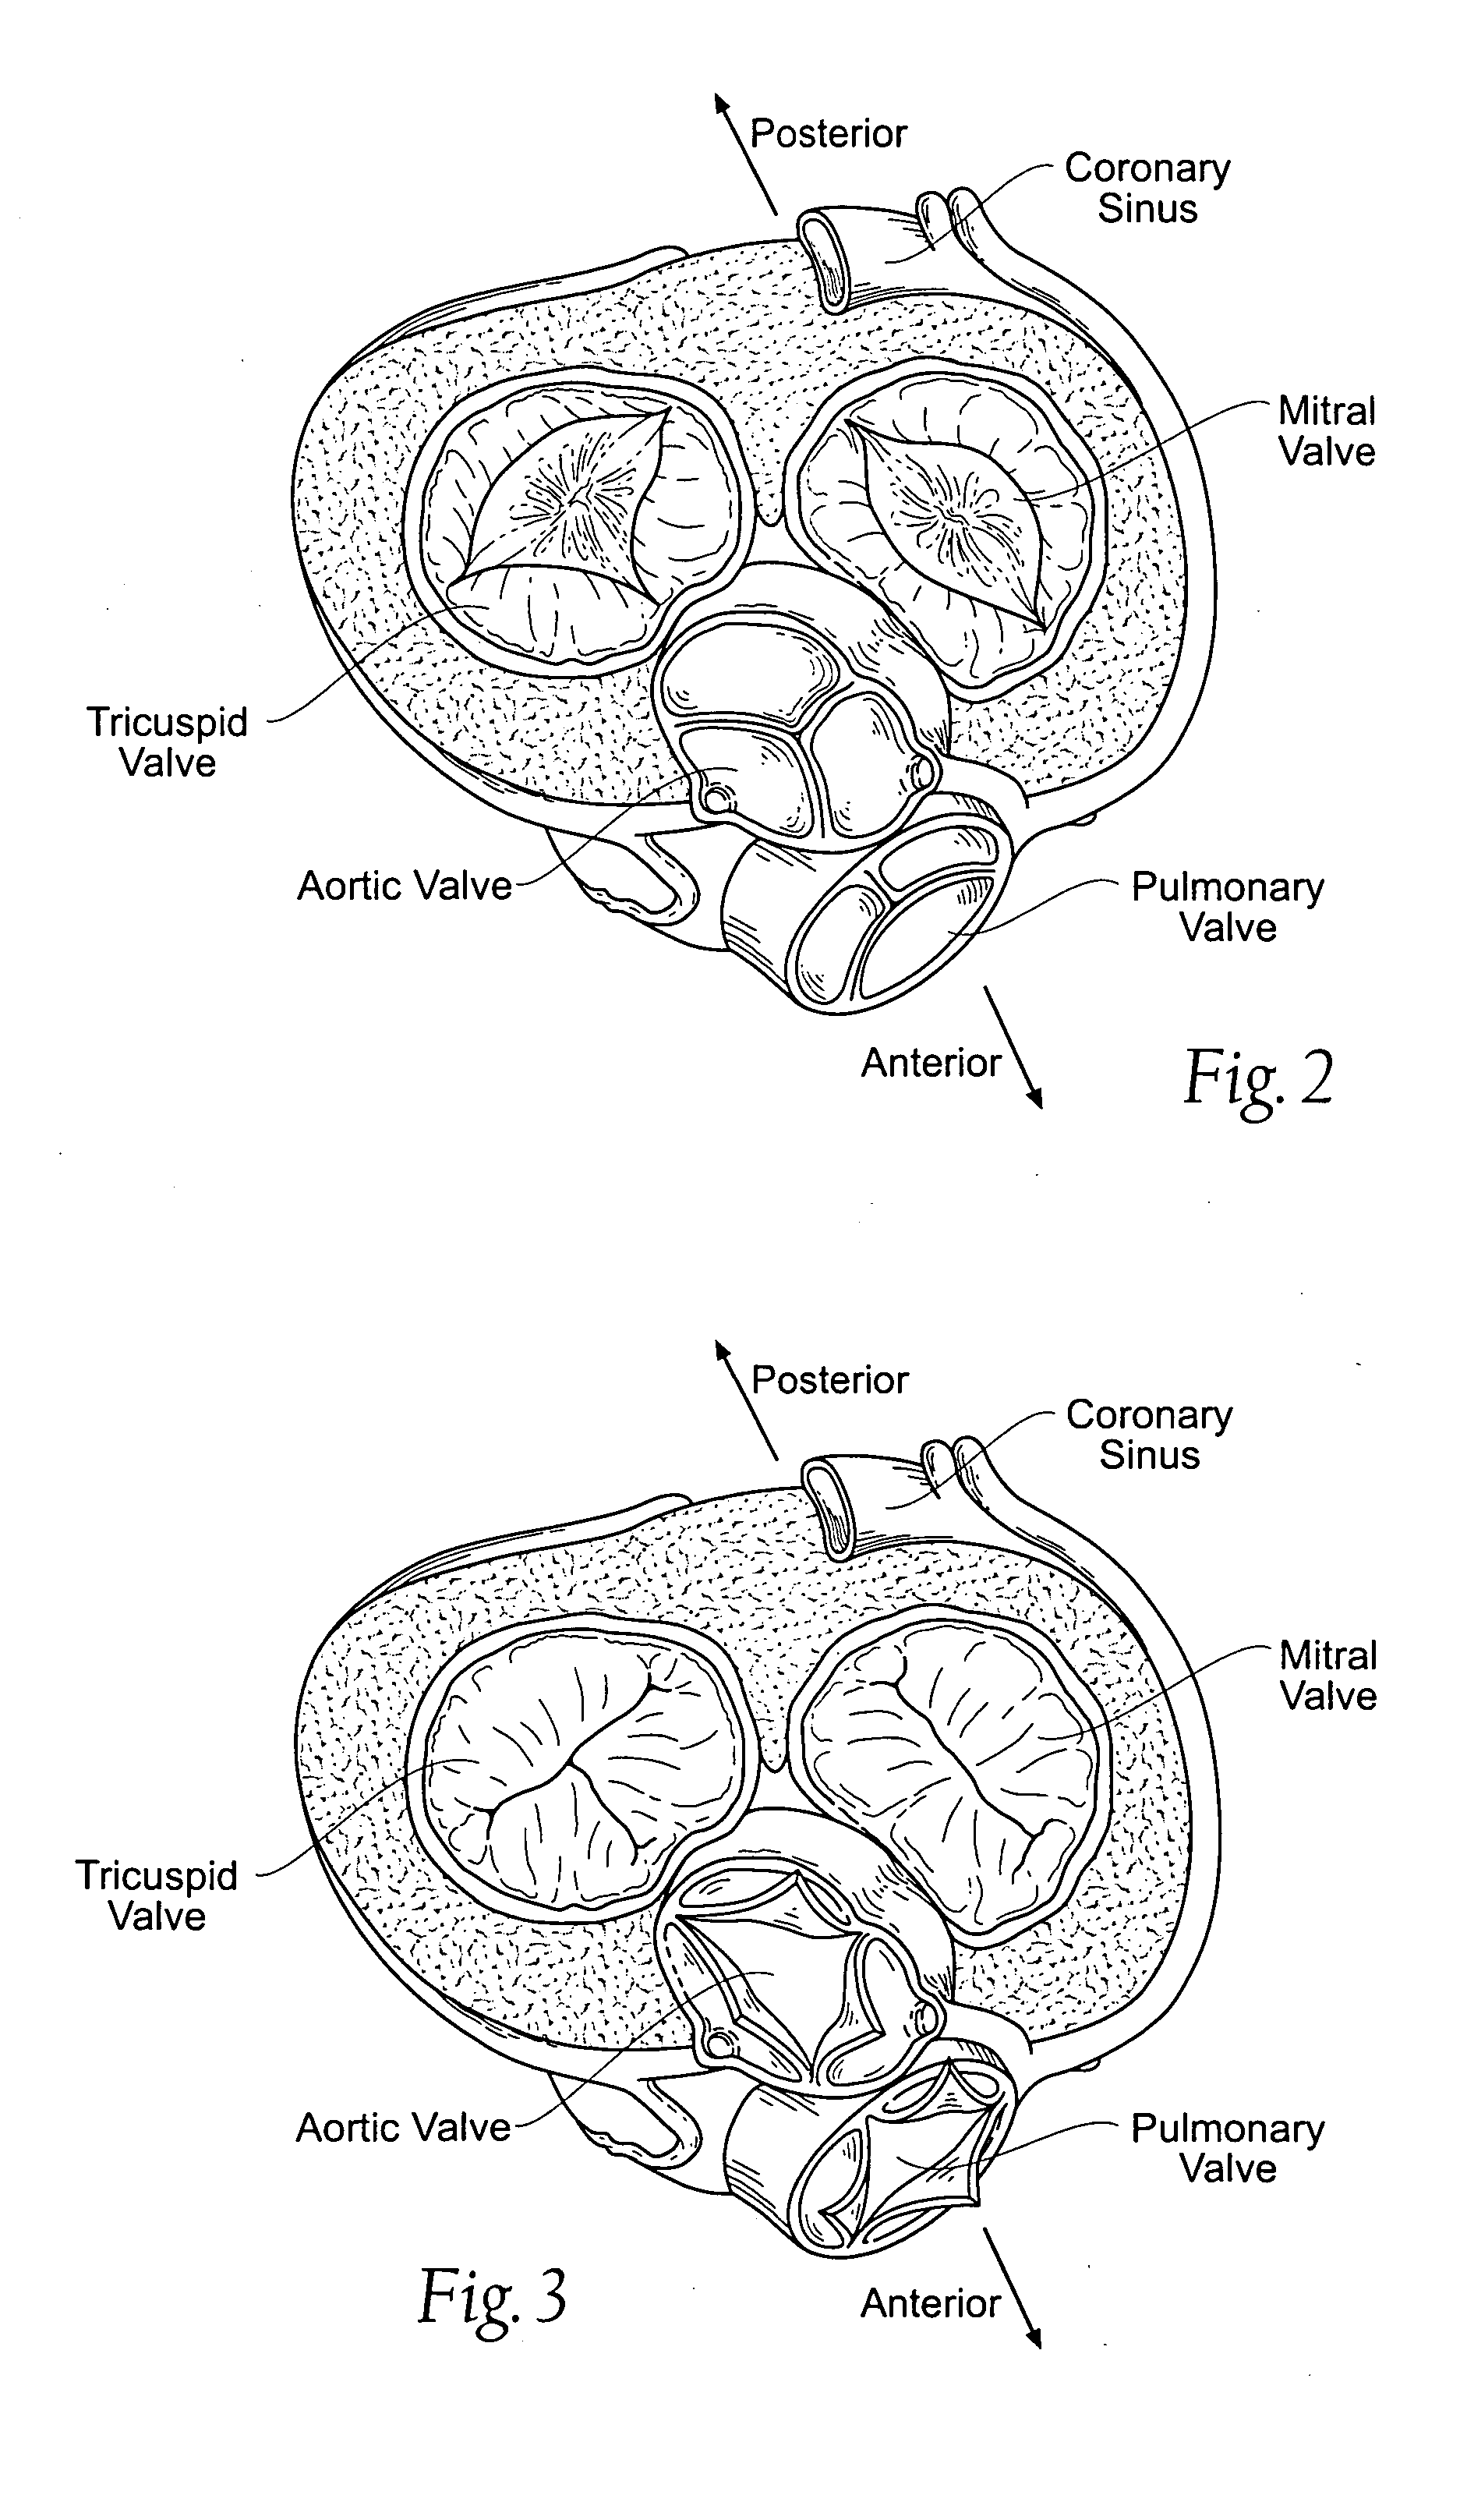 Devices, systems, and methods for supporting tissue and/or structures within a hollow body organ